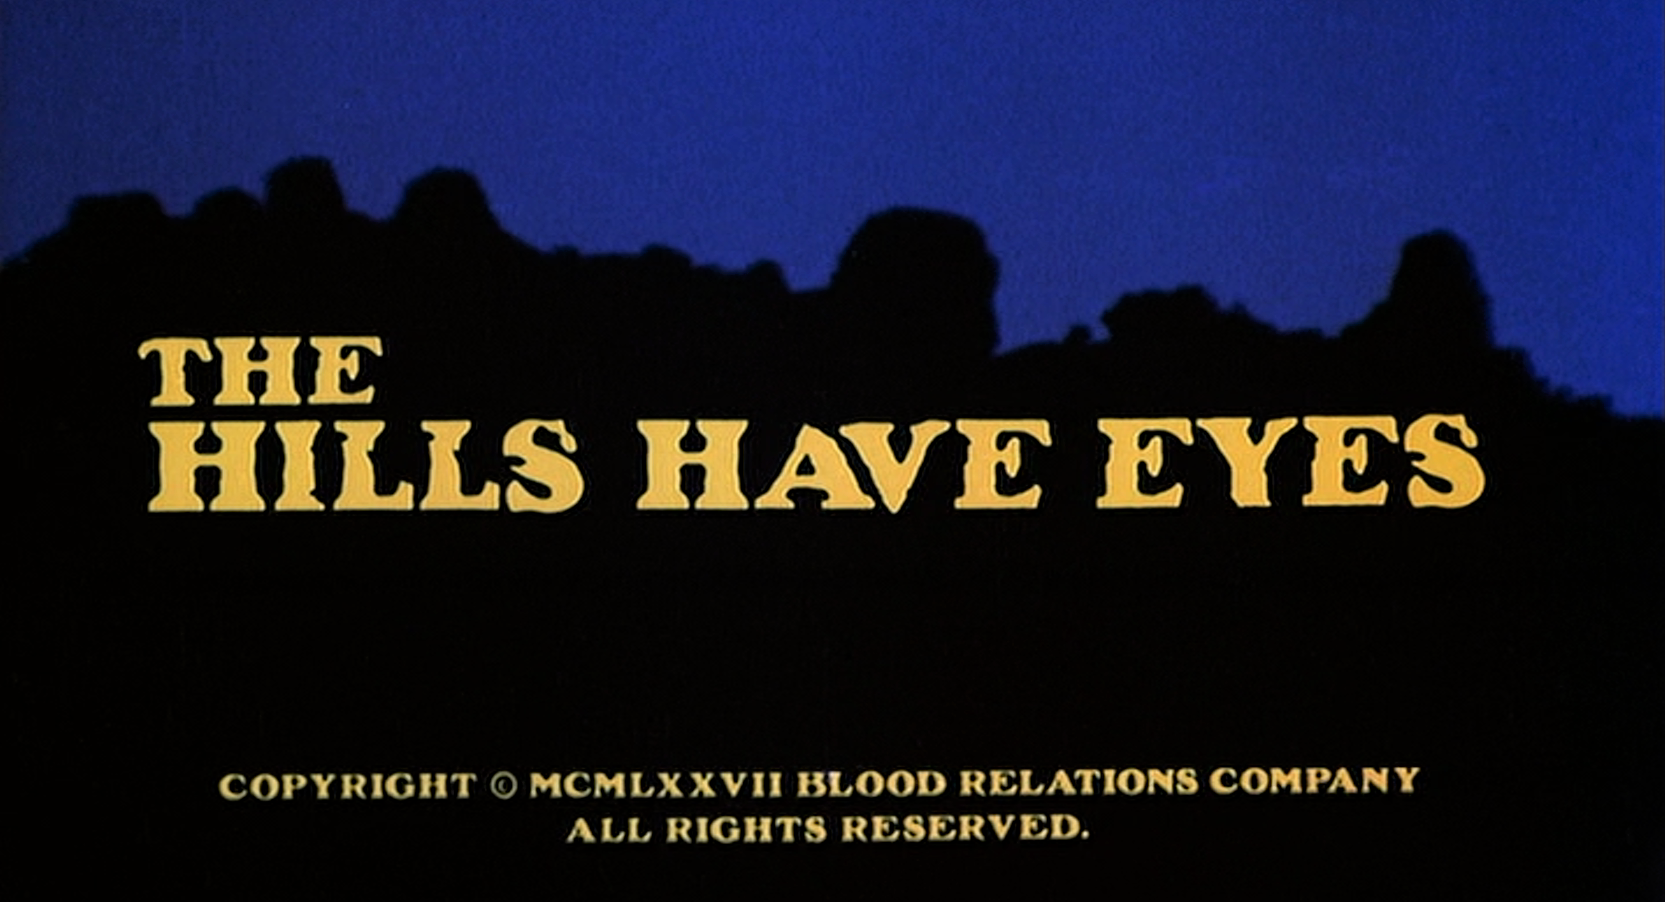 Then & Now Movie Locations: The Hills Have Eyes (1977)